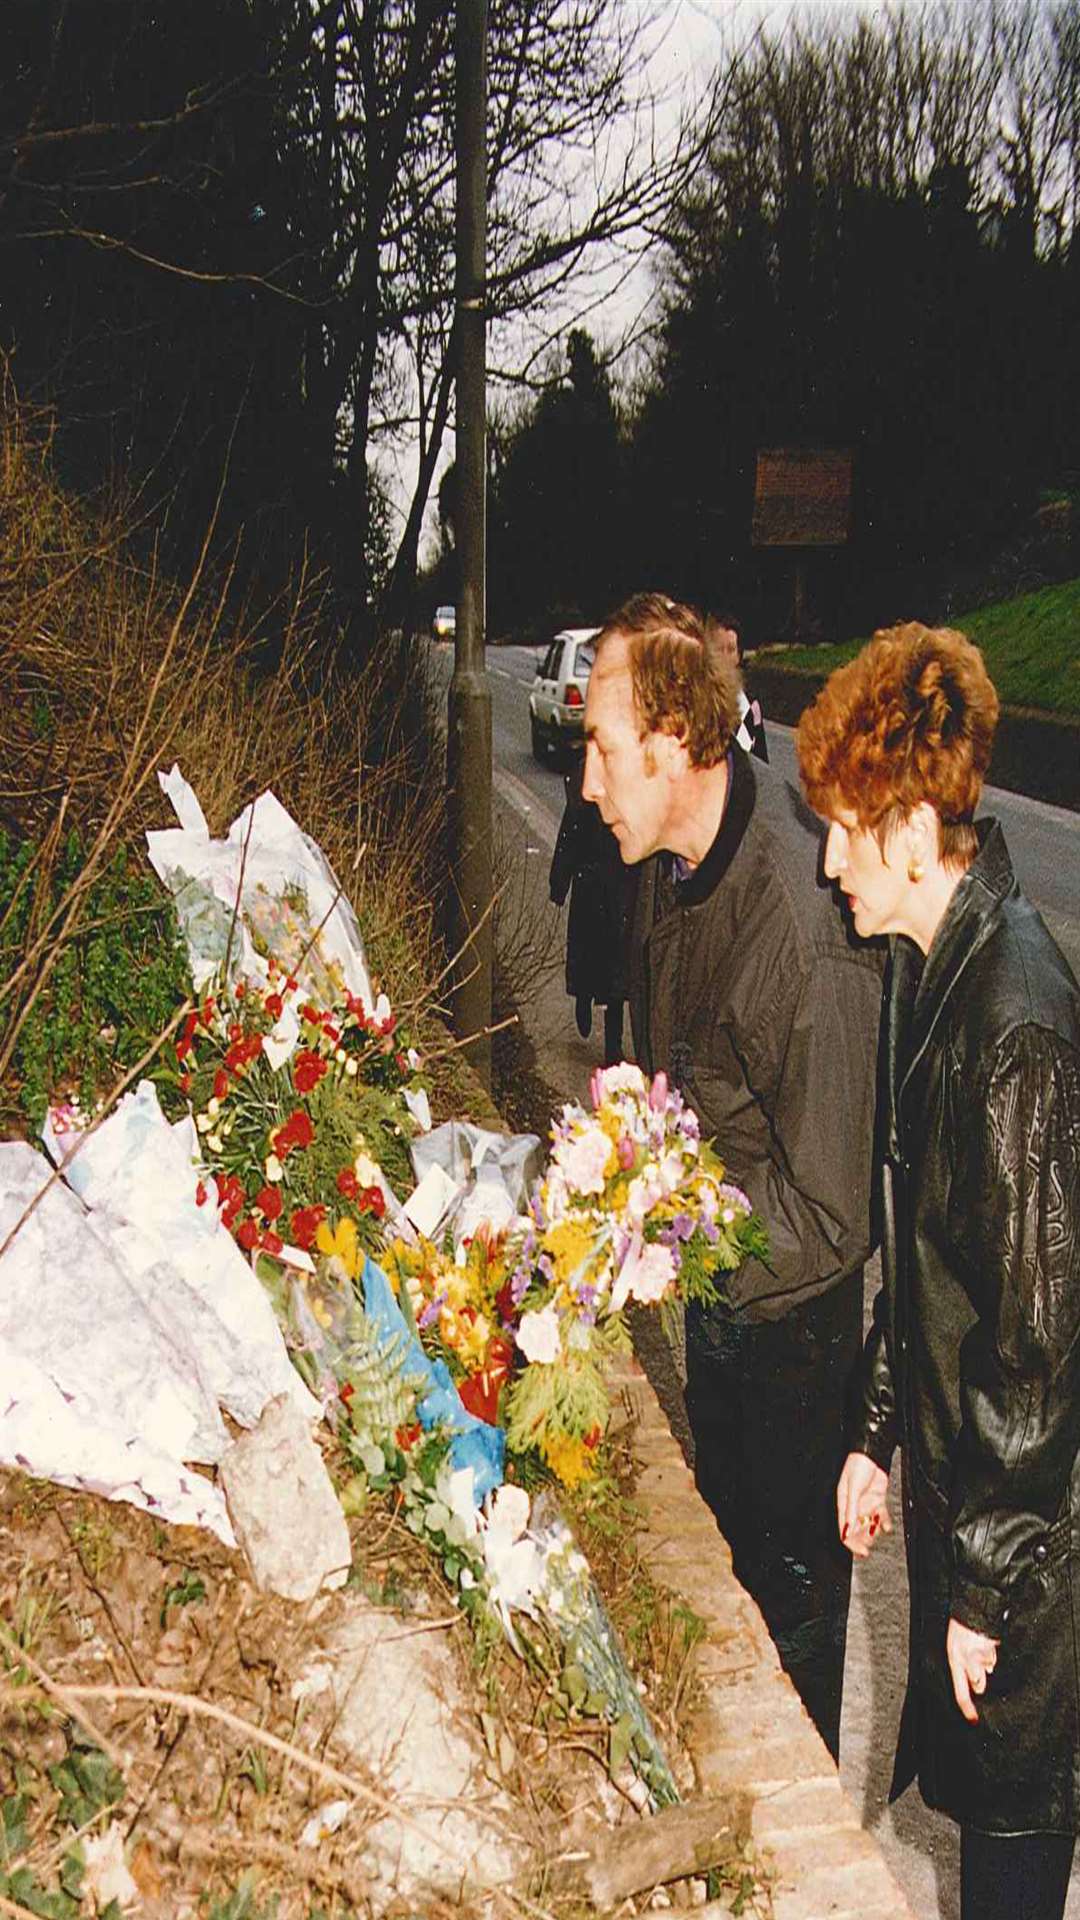 Cliff and Linda Tiltman inspect floral tributes left near the scene of their daughter's killing